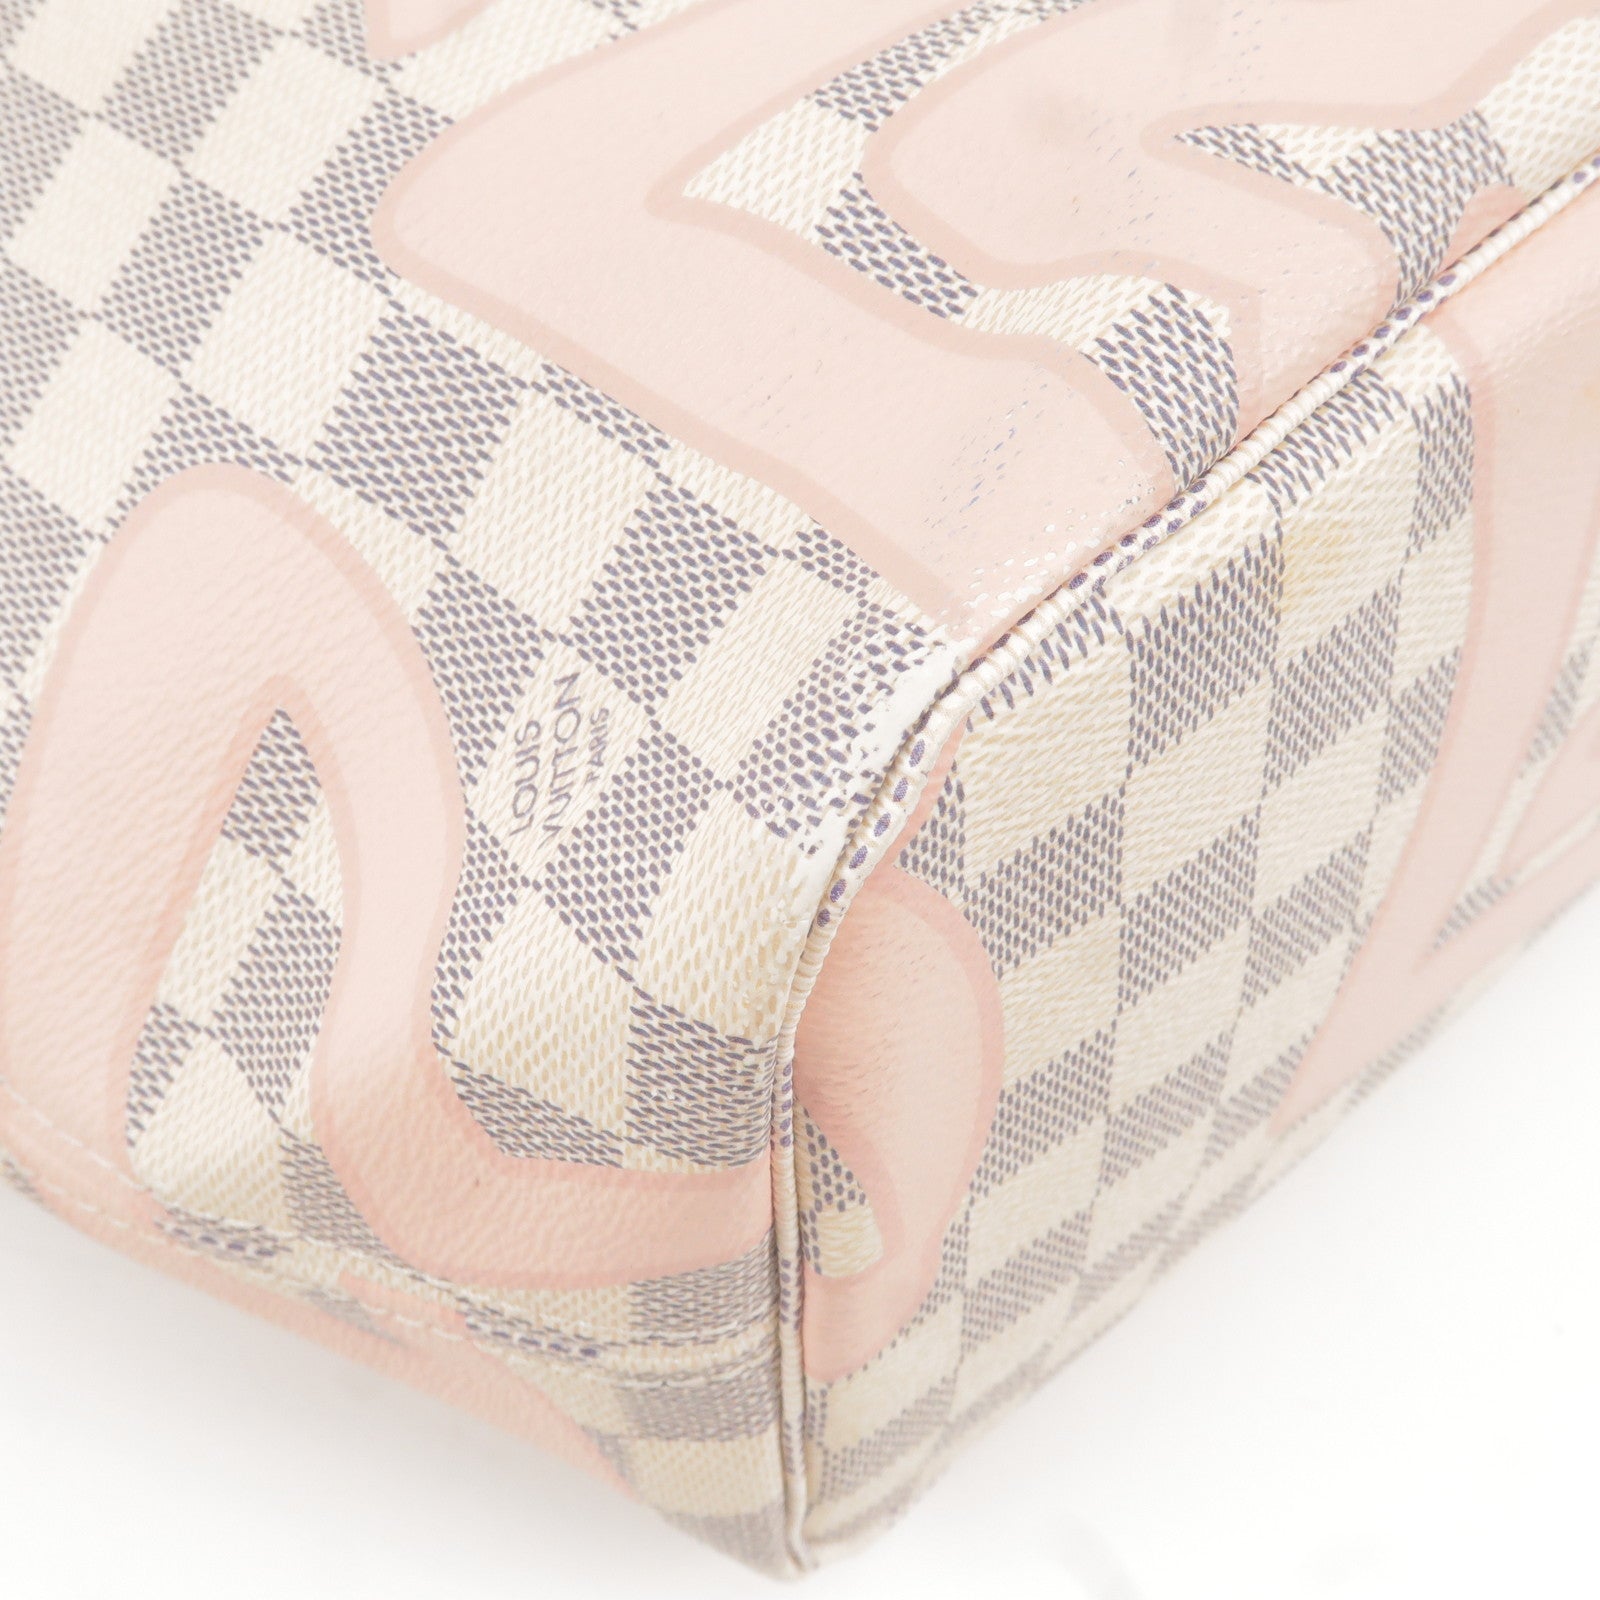 Louis Vuitton Limited Edition Damier Azur Tahitienne Neverfull MM